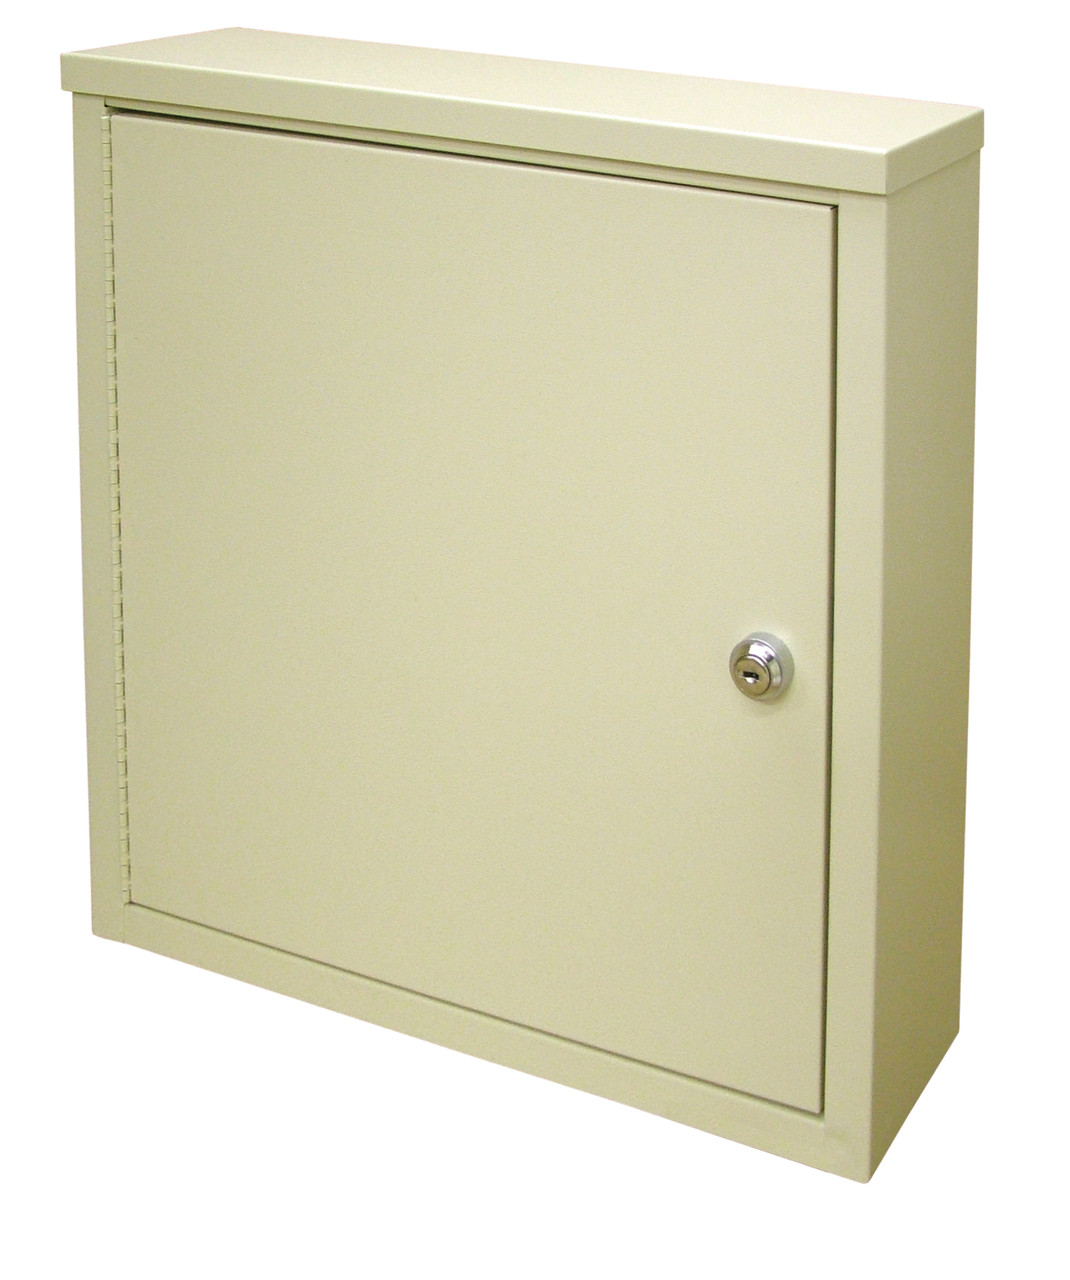 small storage cabinet with doors and drawers